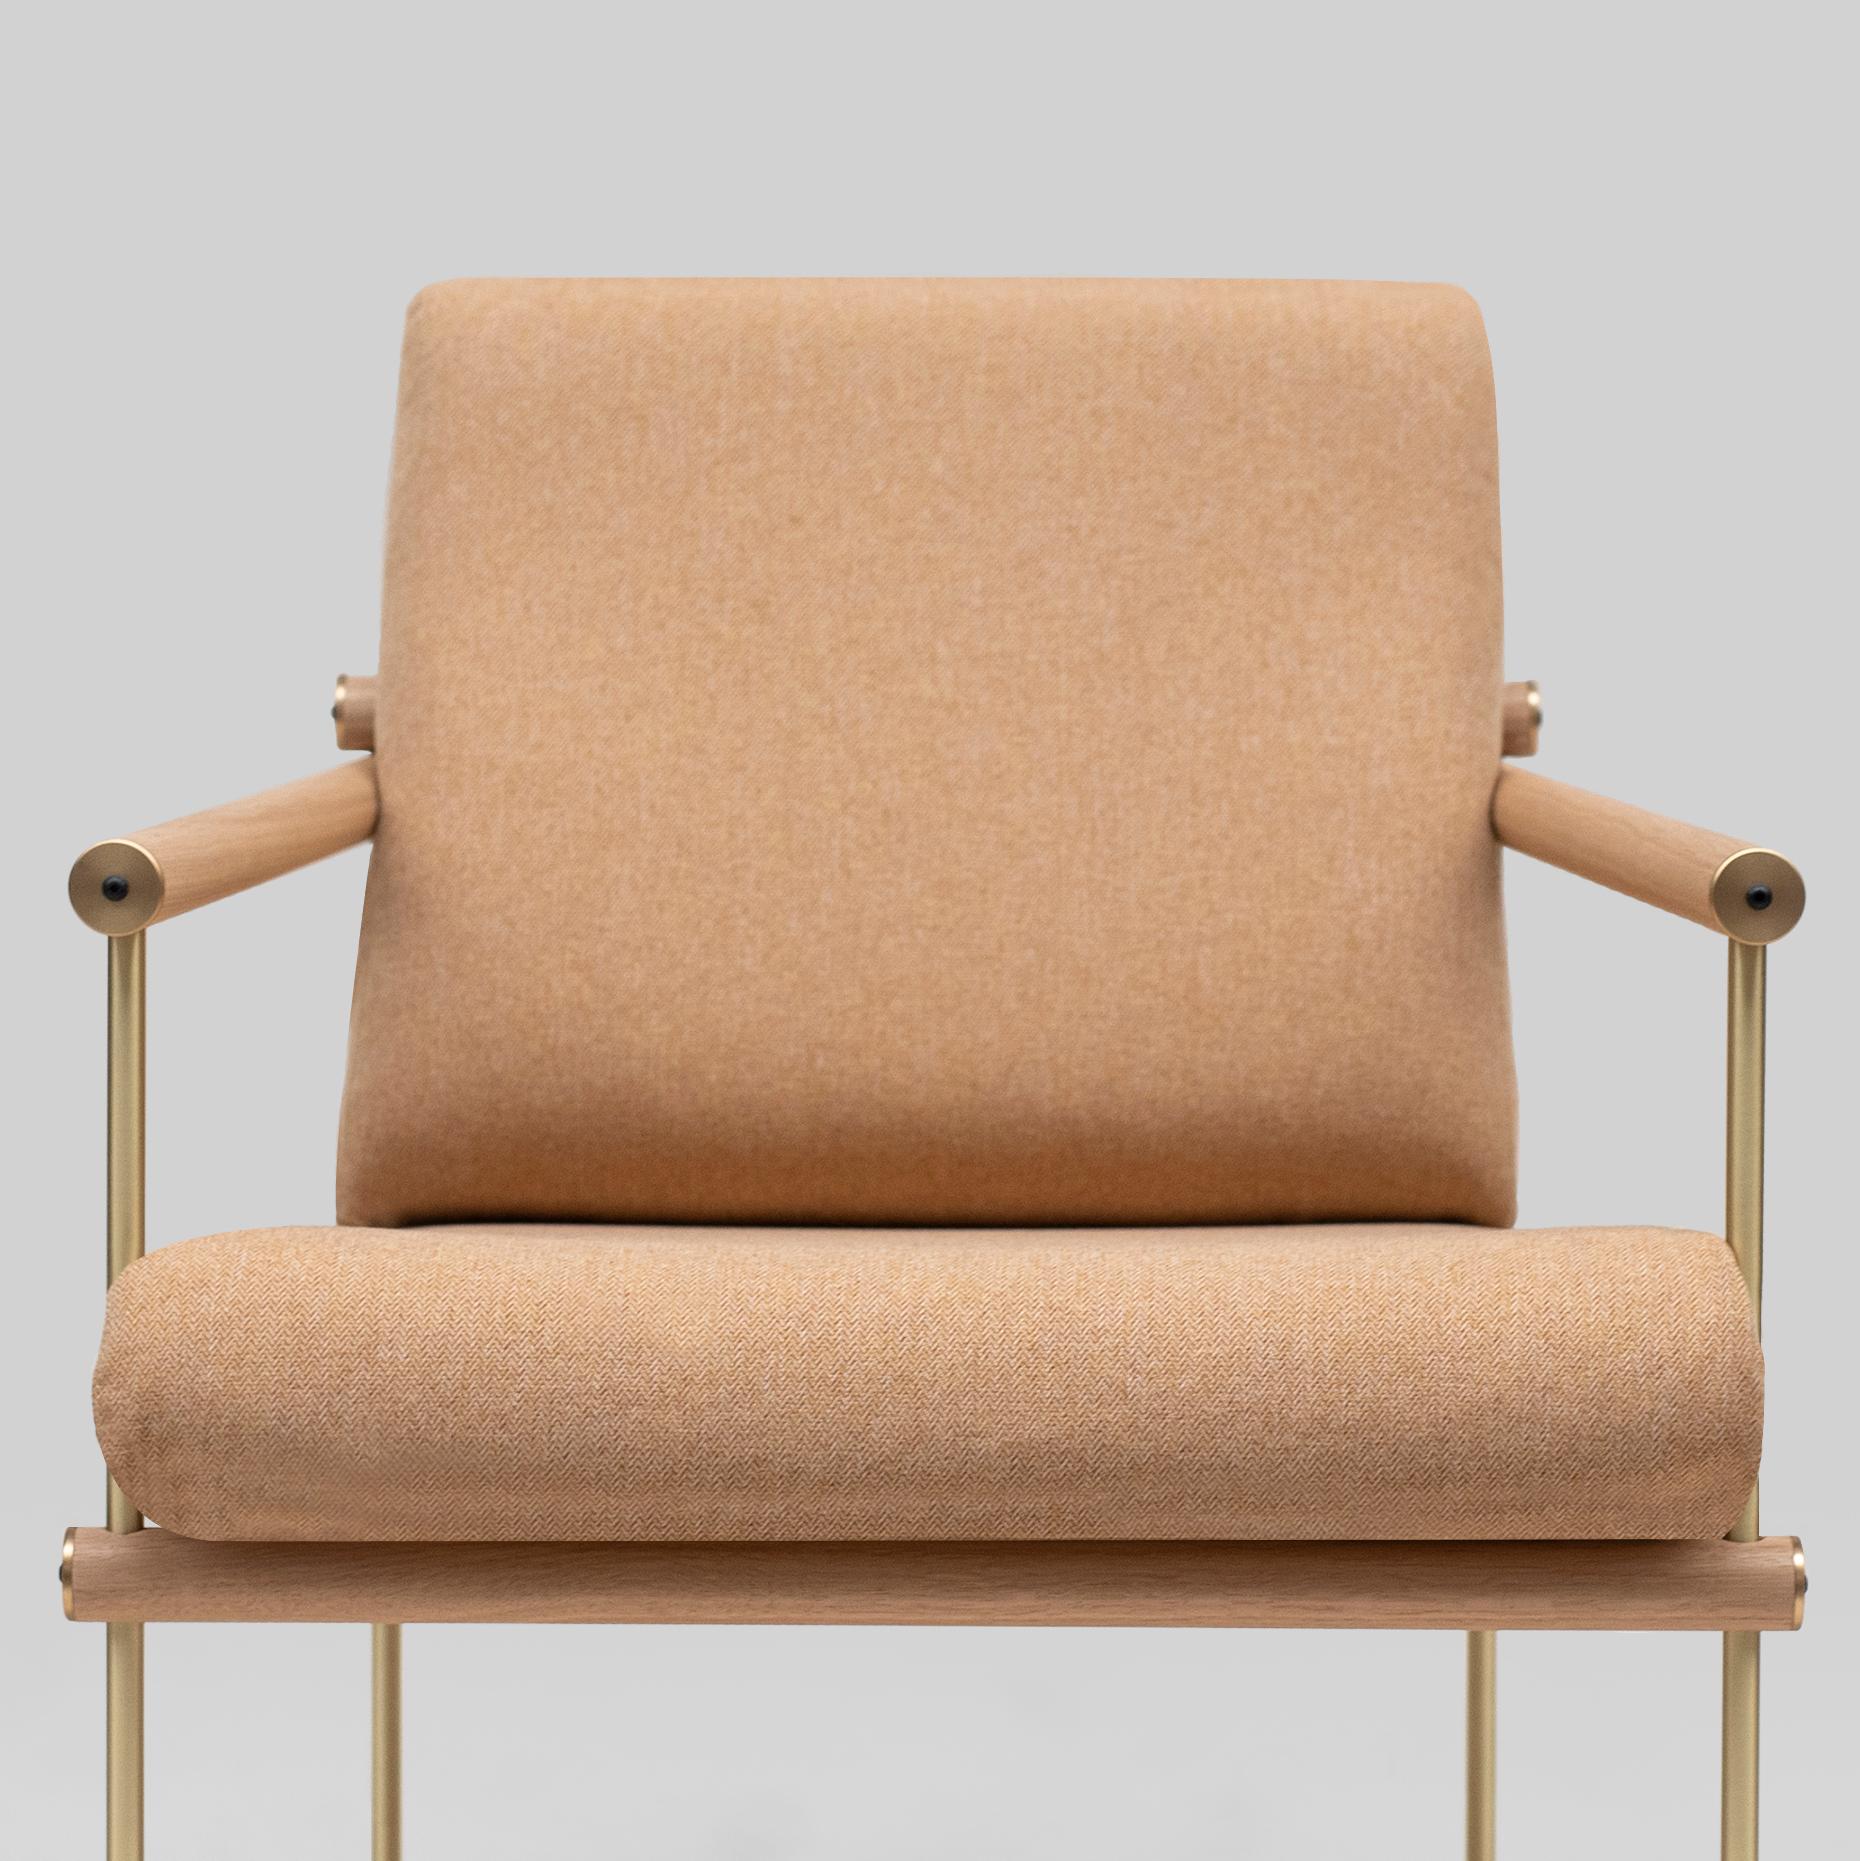 Armchair designed by Peter Ghyczy.
Manufactured by Ghyczy (Netherlands)

Playful construction of solid wooden rods and metal tubing is made possible by a special joinery between wood and metal. The loose seat and backrest cushions can be adjusted to